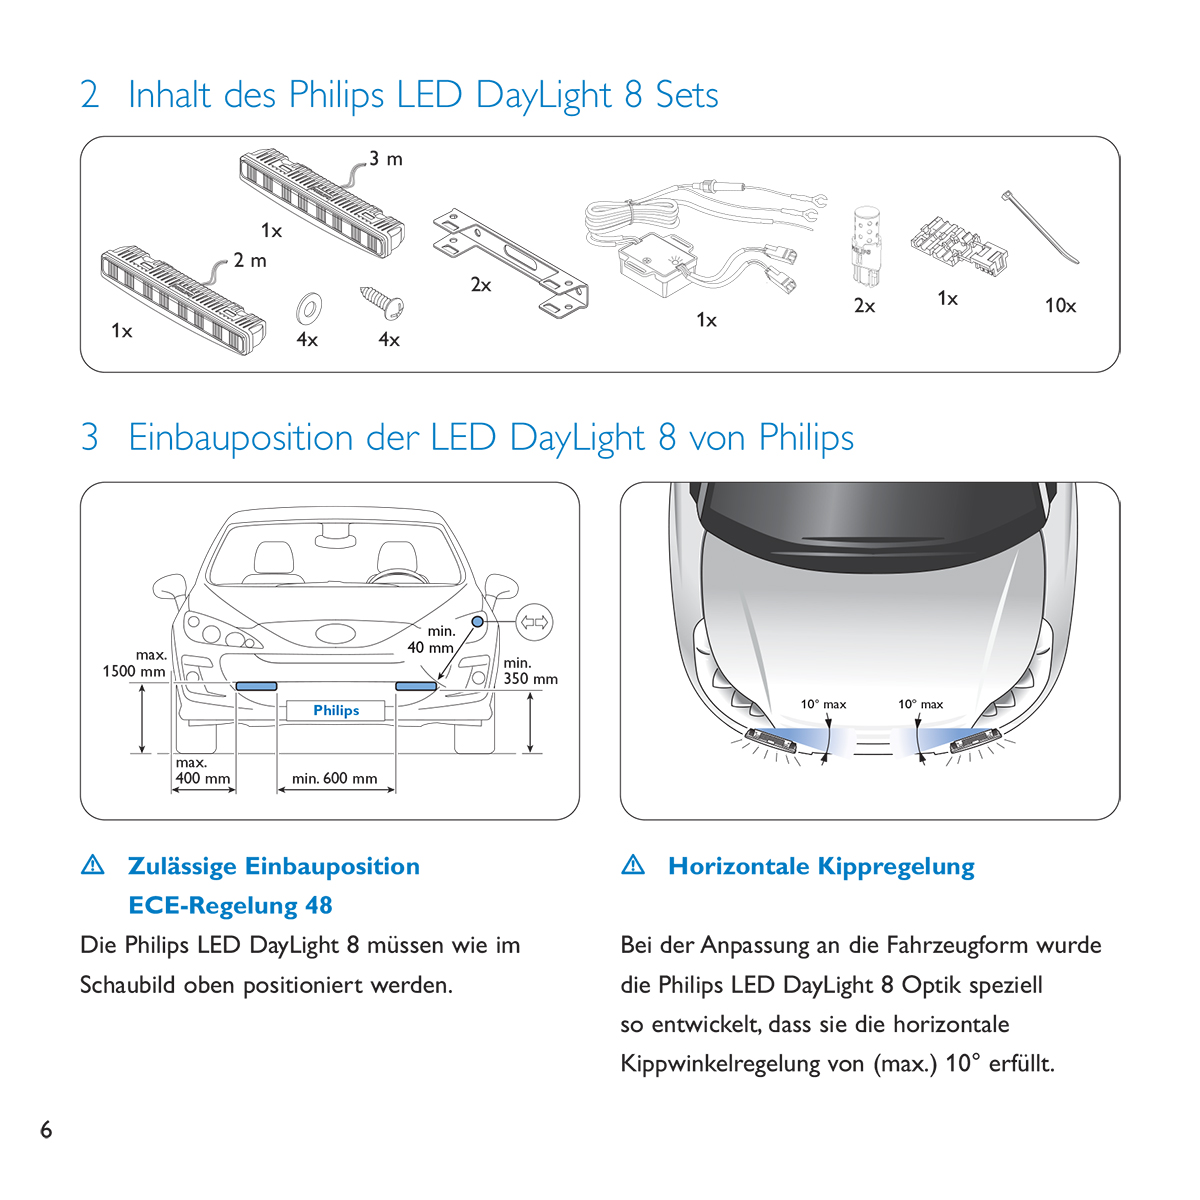 Philips LED DayLight 8 user guide - Inside page - German